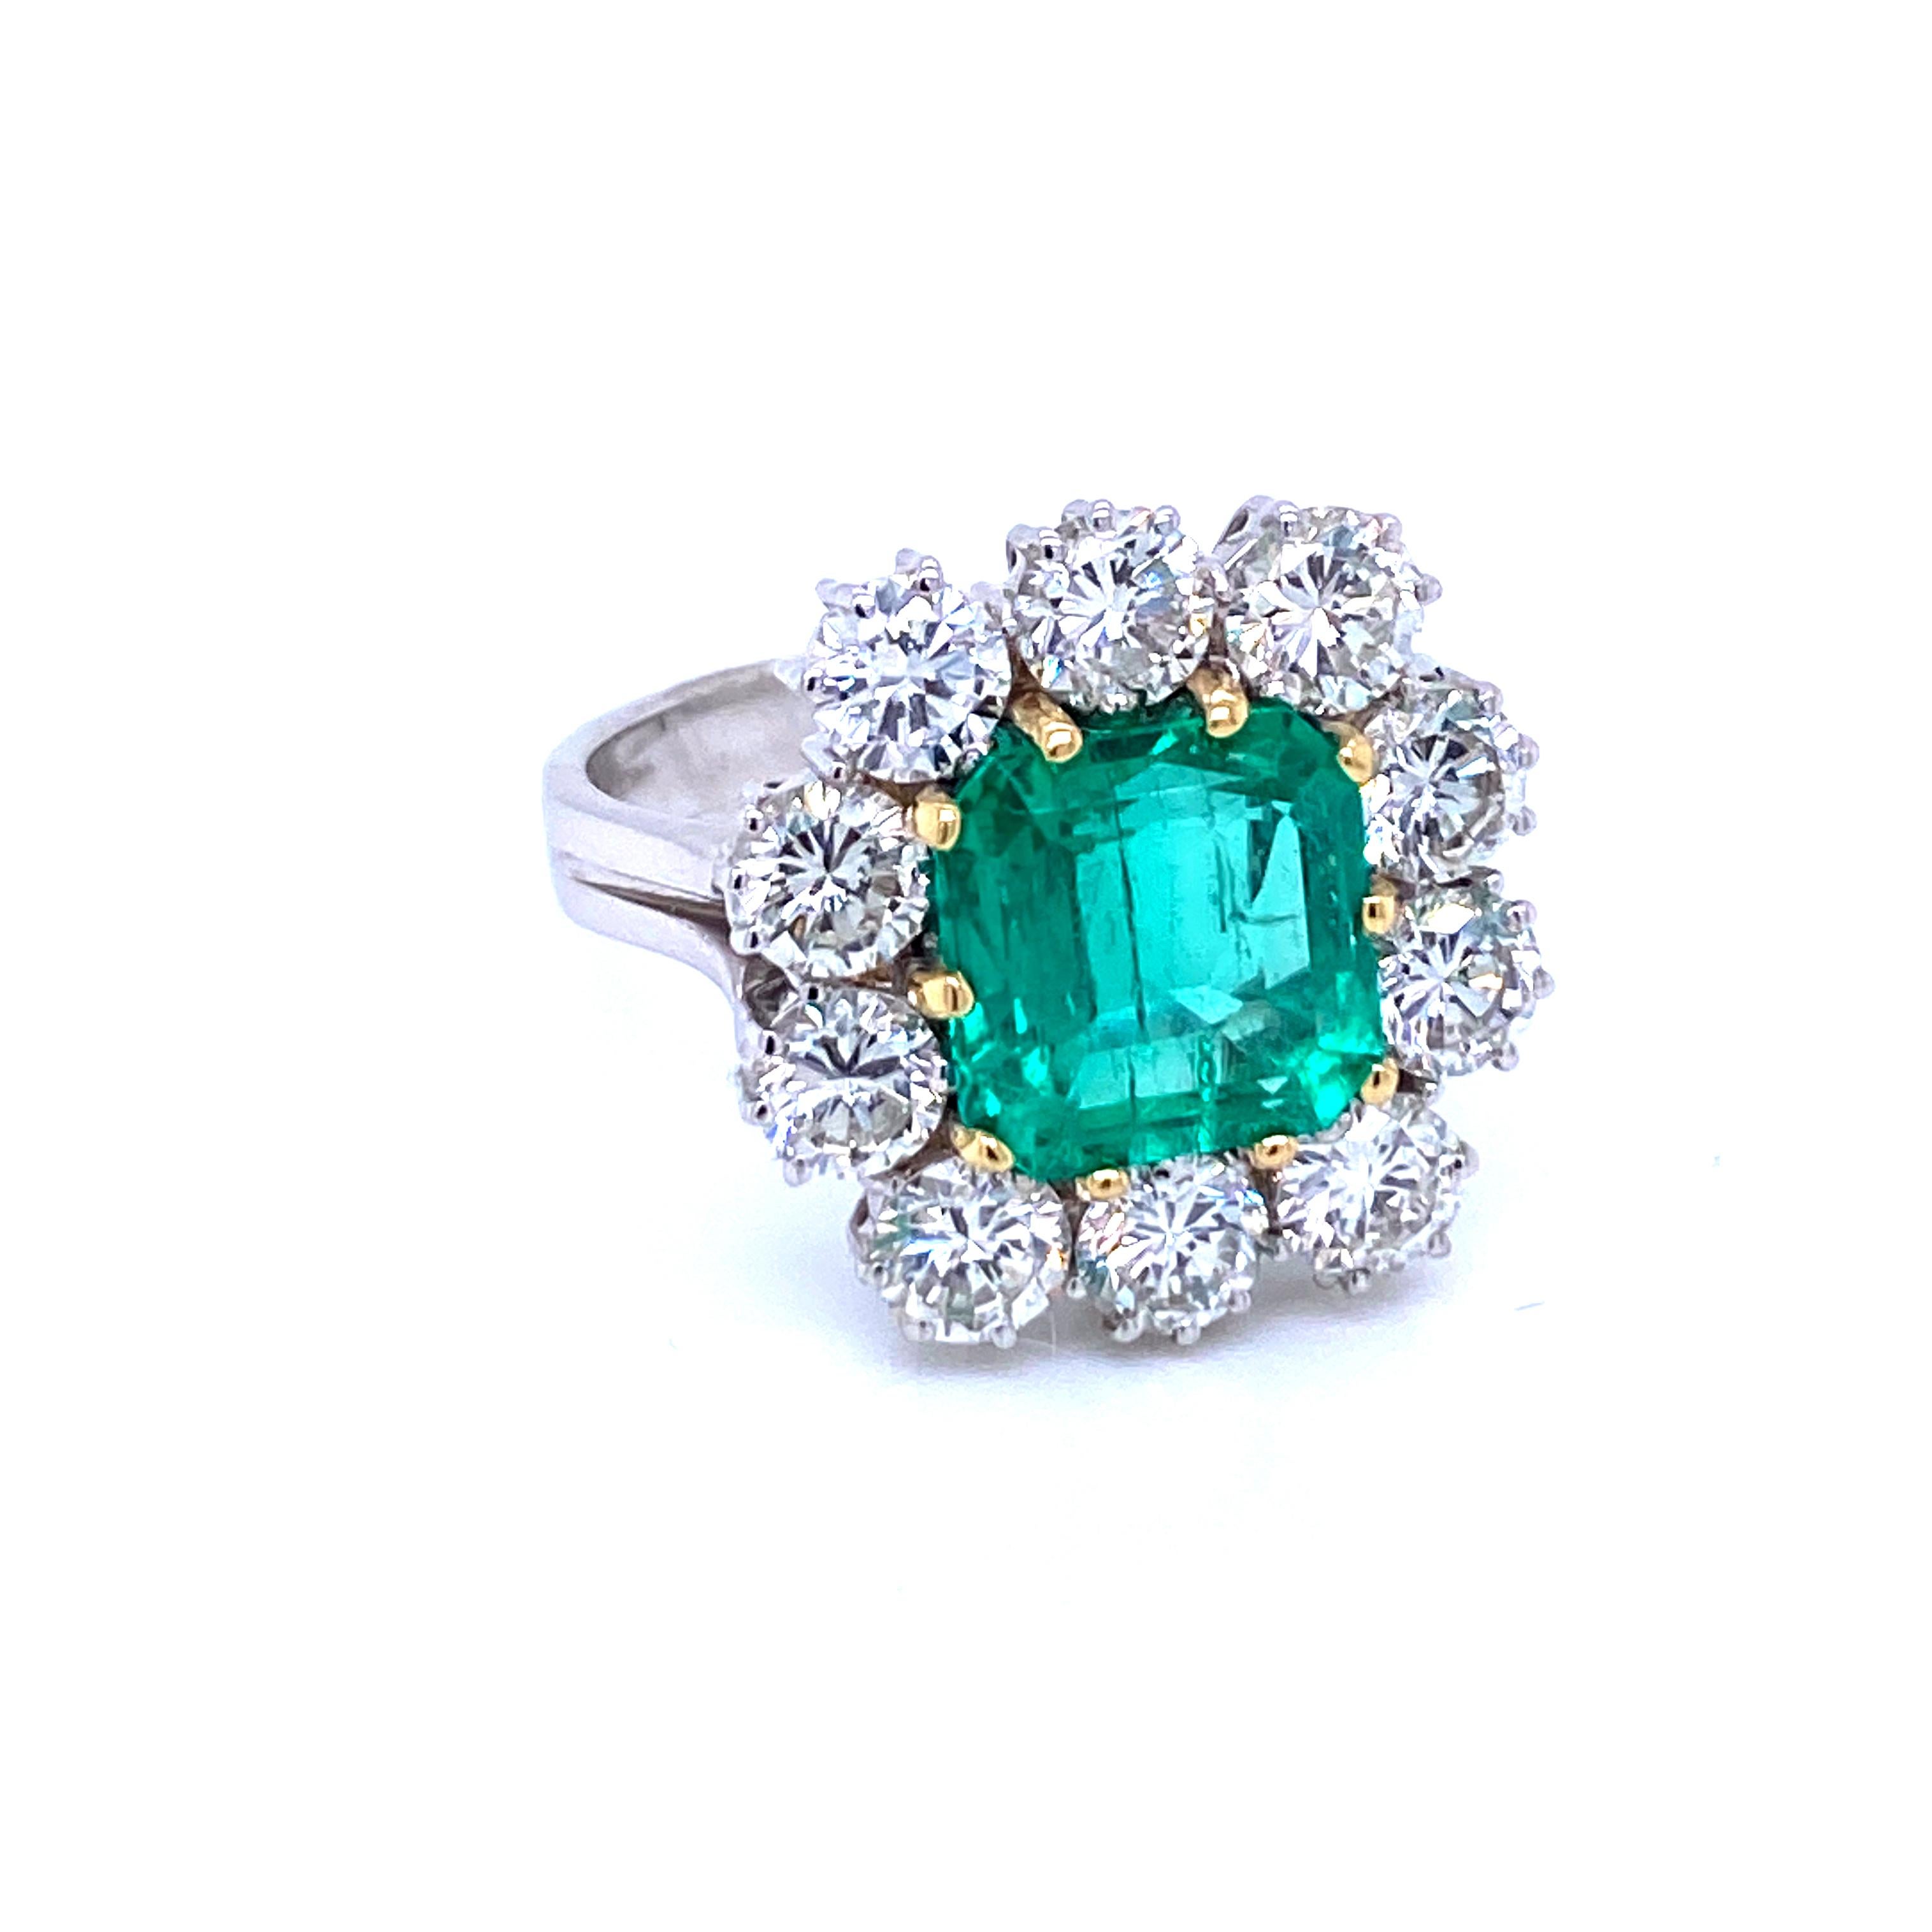 A beautiful and classy 18k white Gold engagement ring showcasing a natural Vivid Colombian Emerald 4 carats of great quality, surrounded by  10 Sparkling Round brilliant cut diamonds, total weight 2.70 carats, graded G color Vvs.
Origin Italy, circa